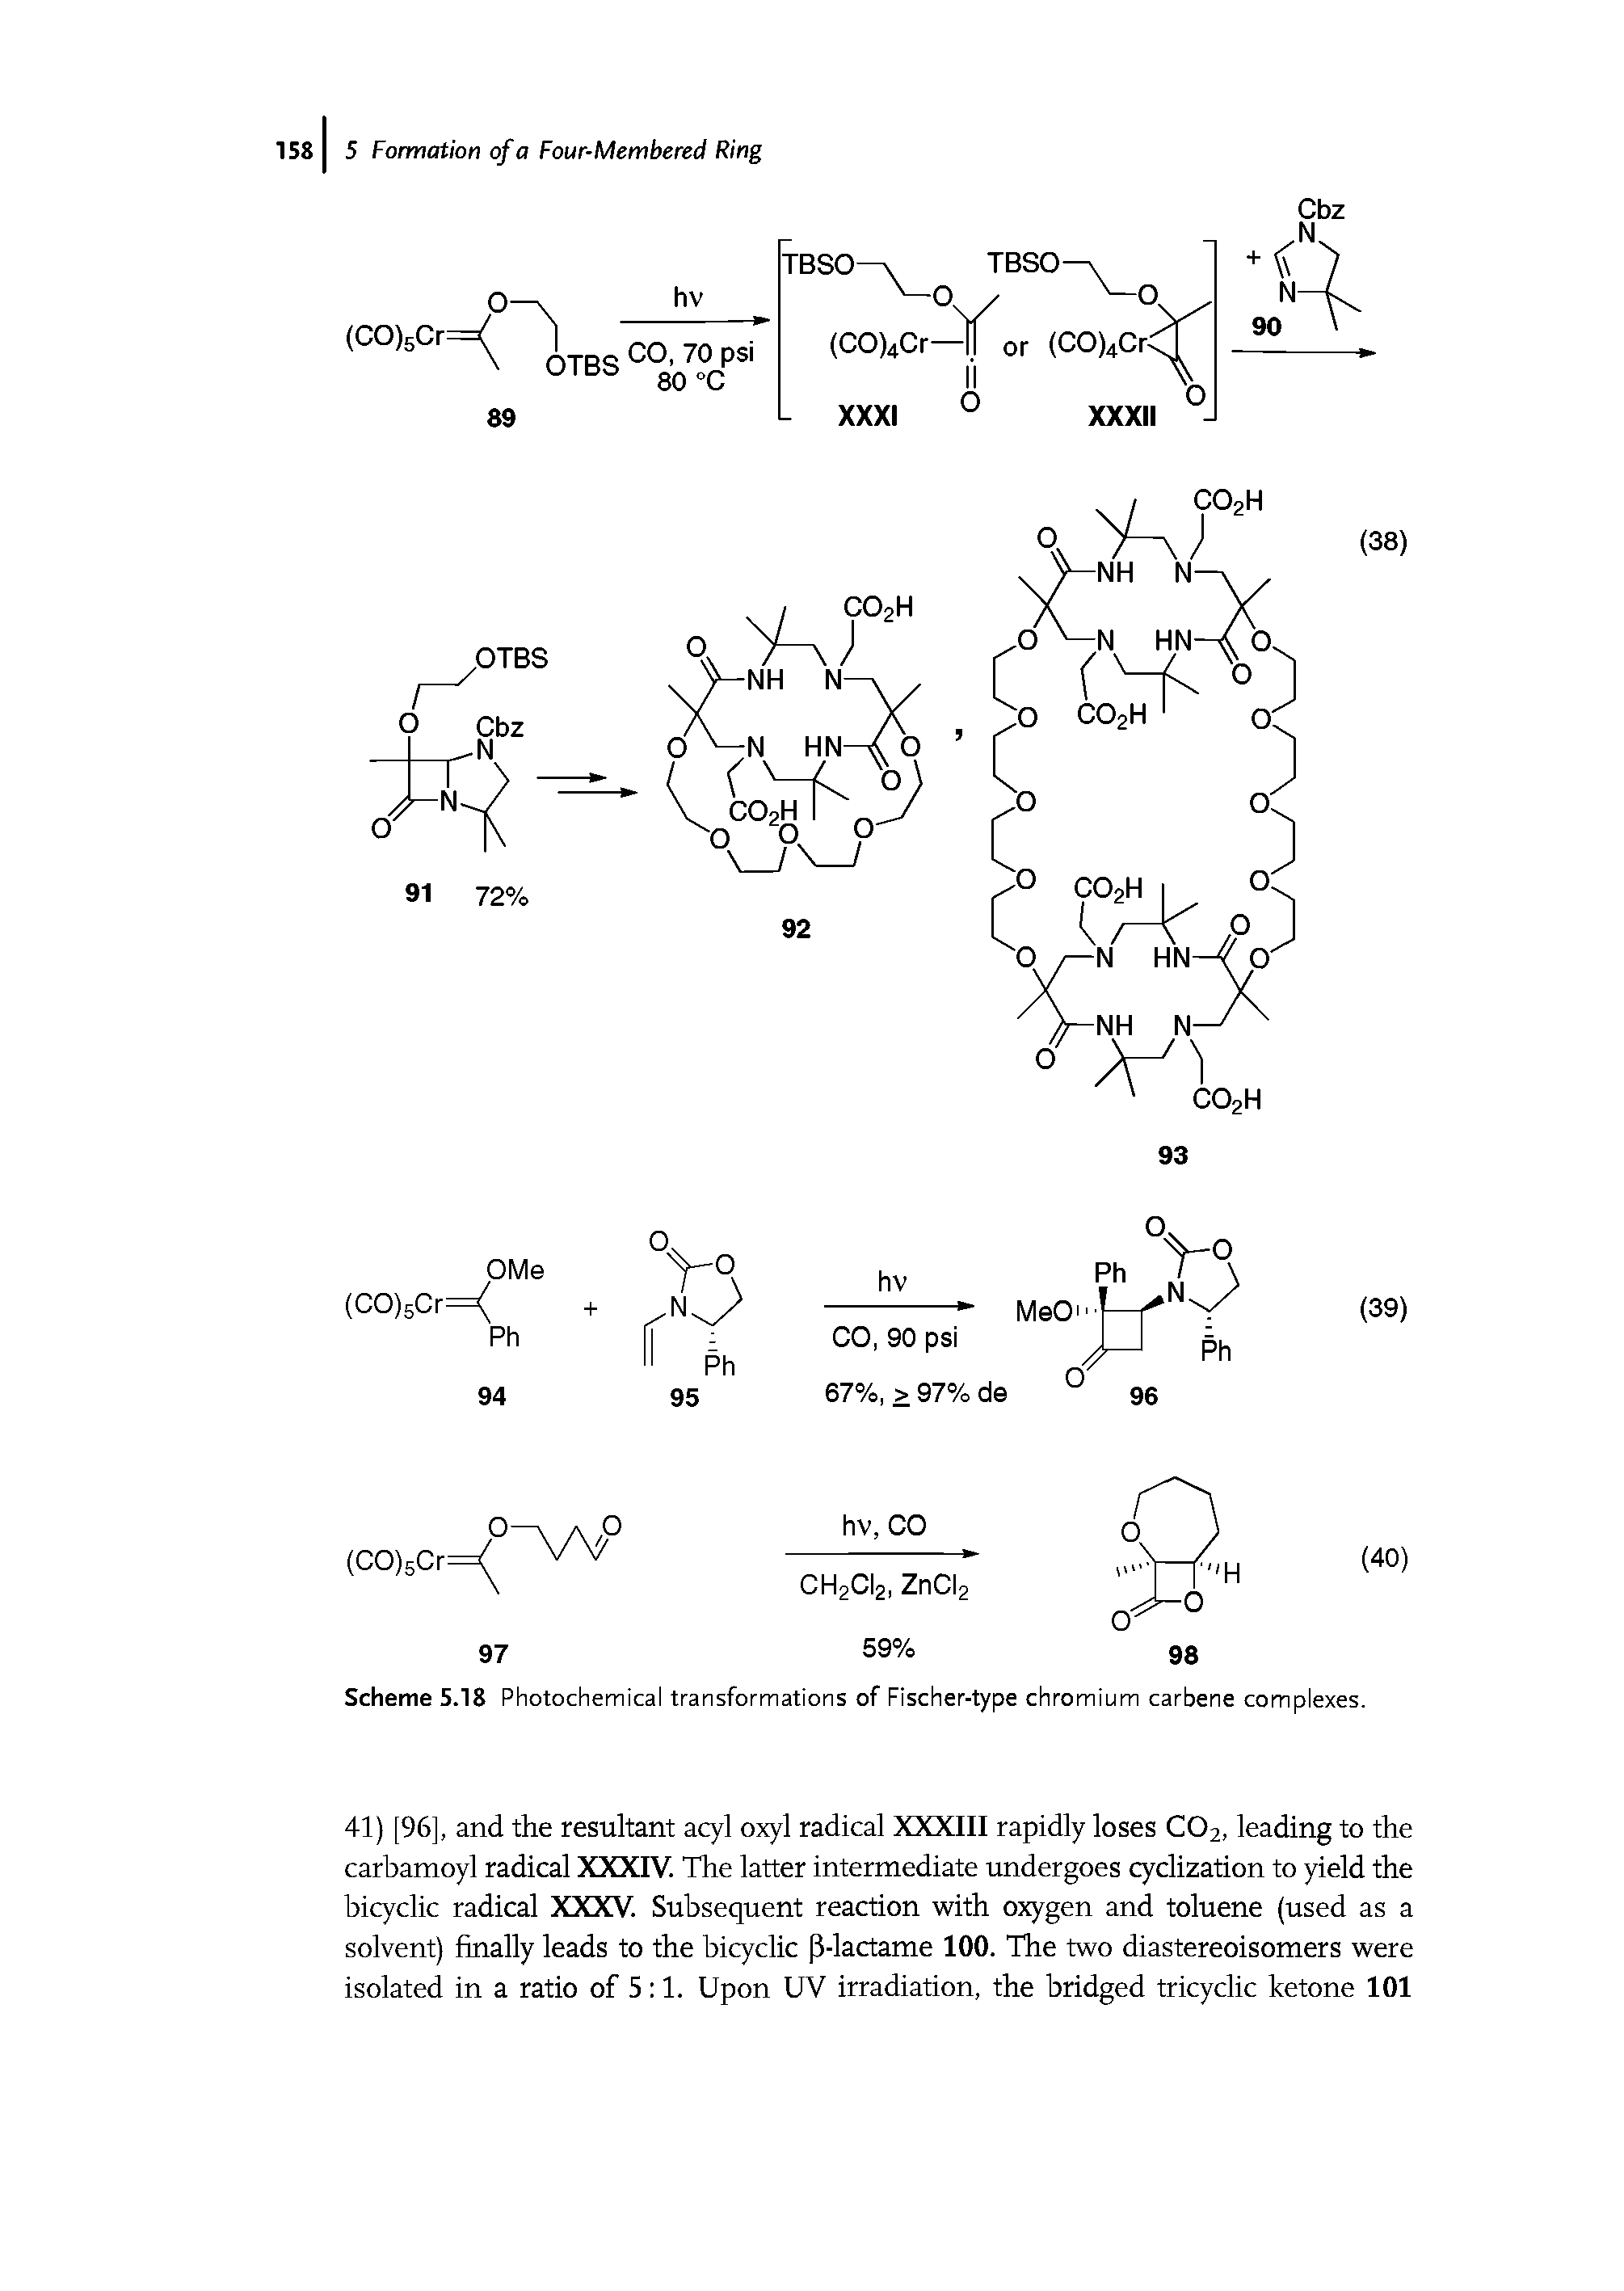 Scheme 5.18 Photochemical transformations of Fischer-type chromium carbene complexes.